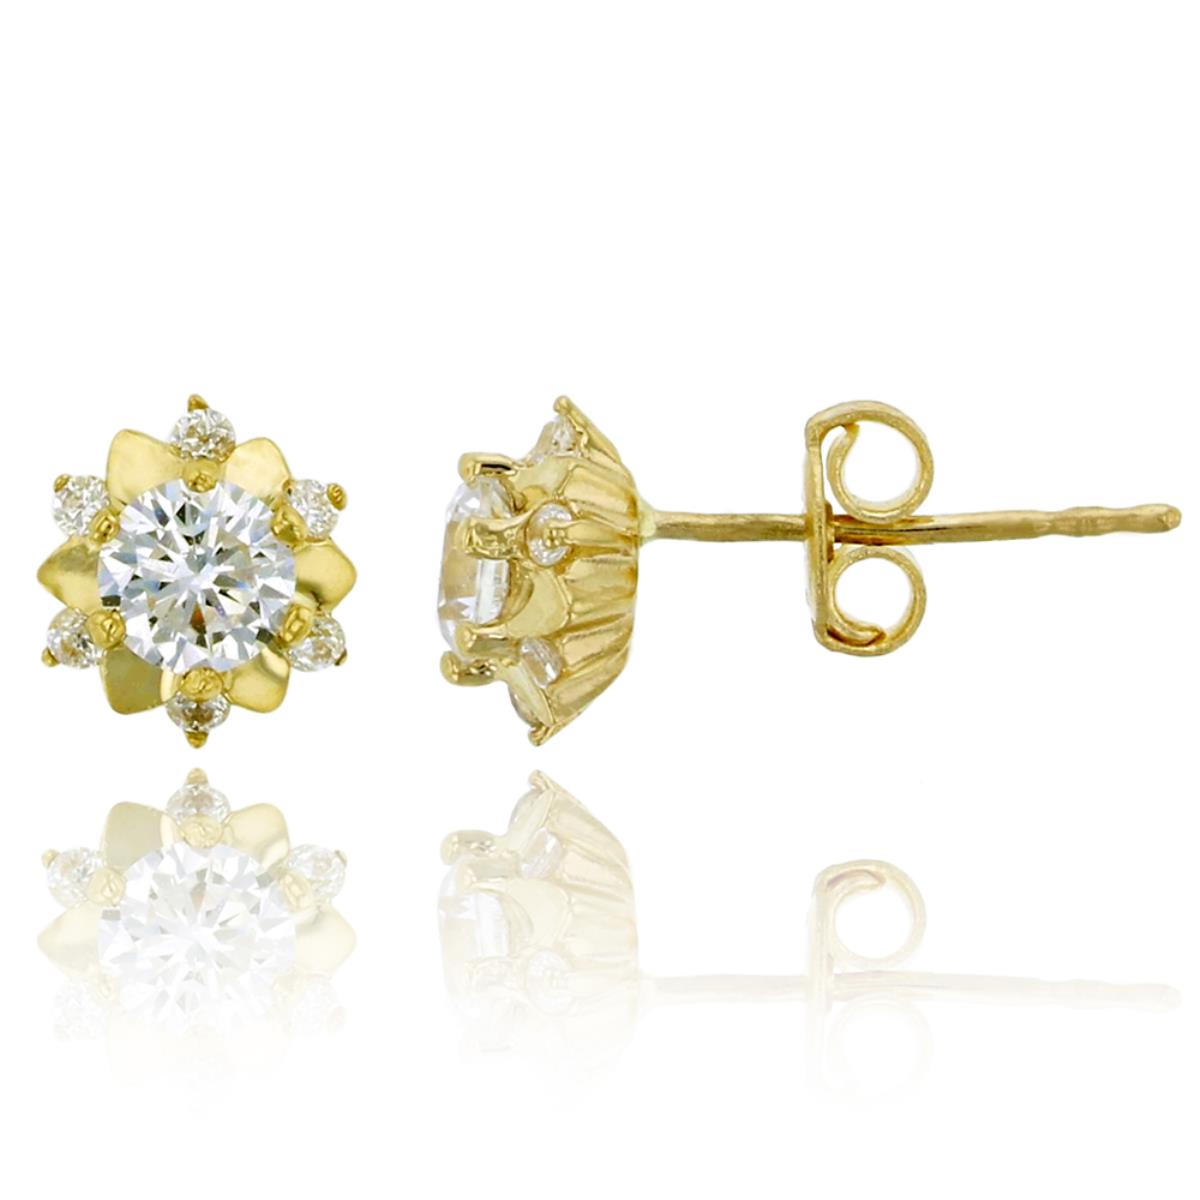 10K Yellow Gold 7mm Micropave Round Cut Flower Stud Earrings with Push Backs